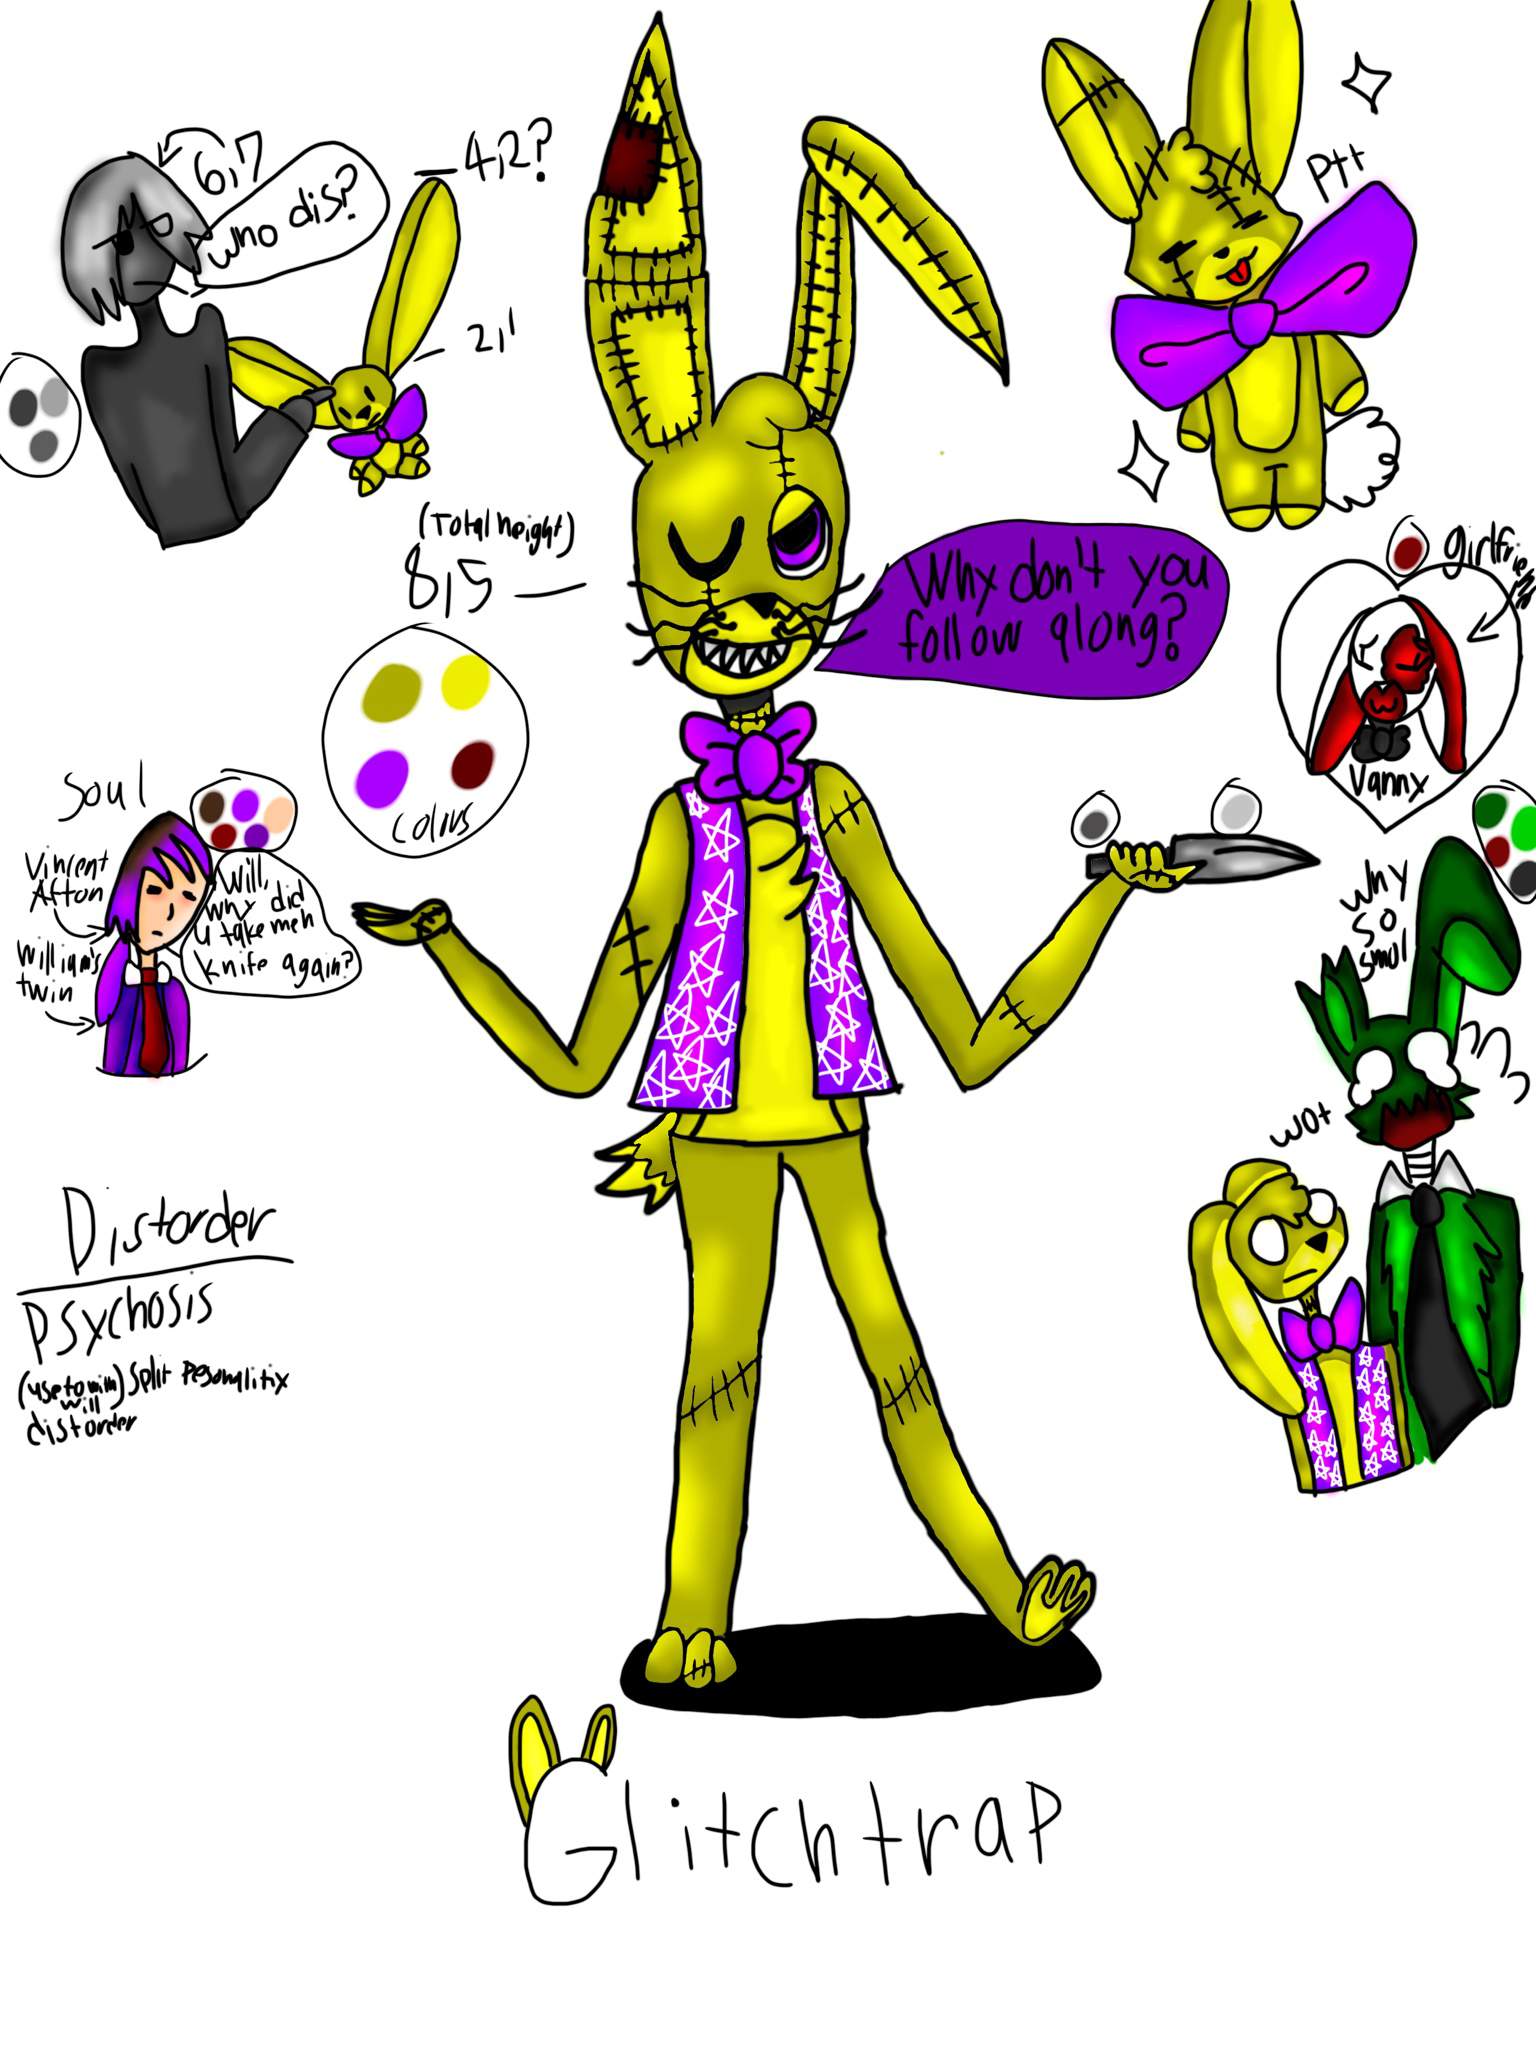 A new rabbit has appeared (GlitchTrap) [Cringe] | Five Nights At Freddy ...